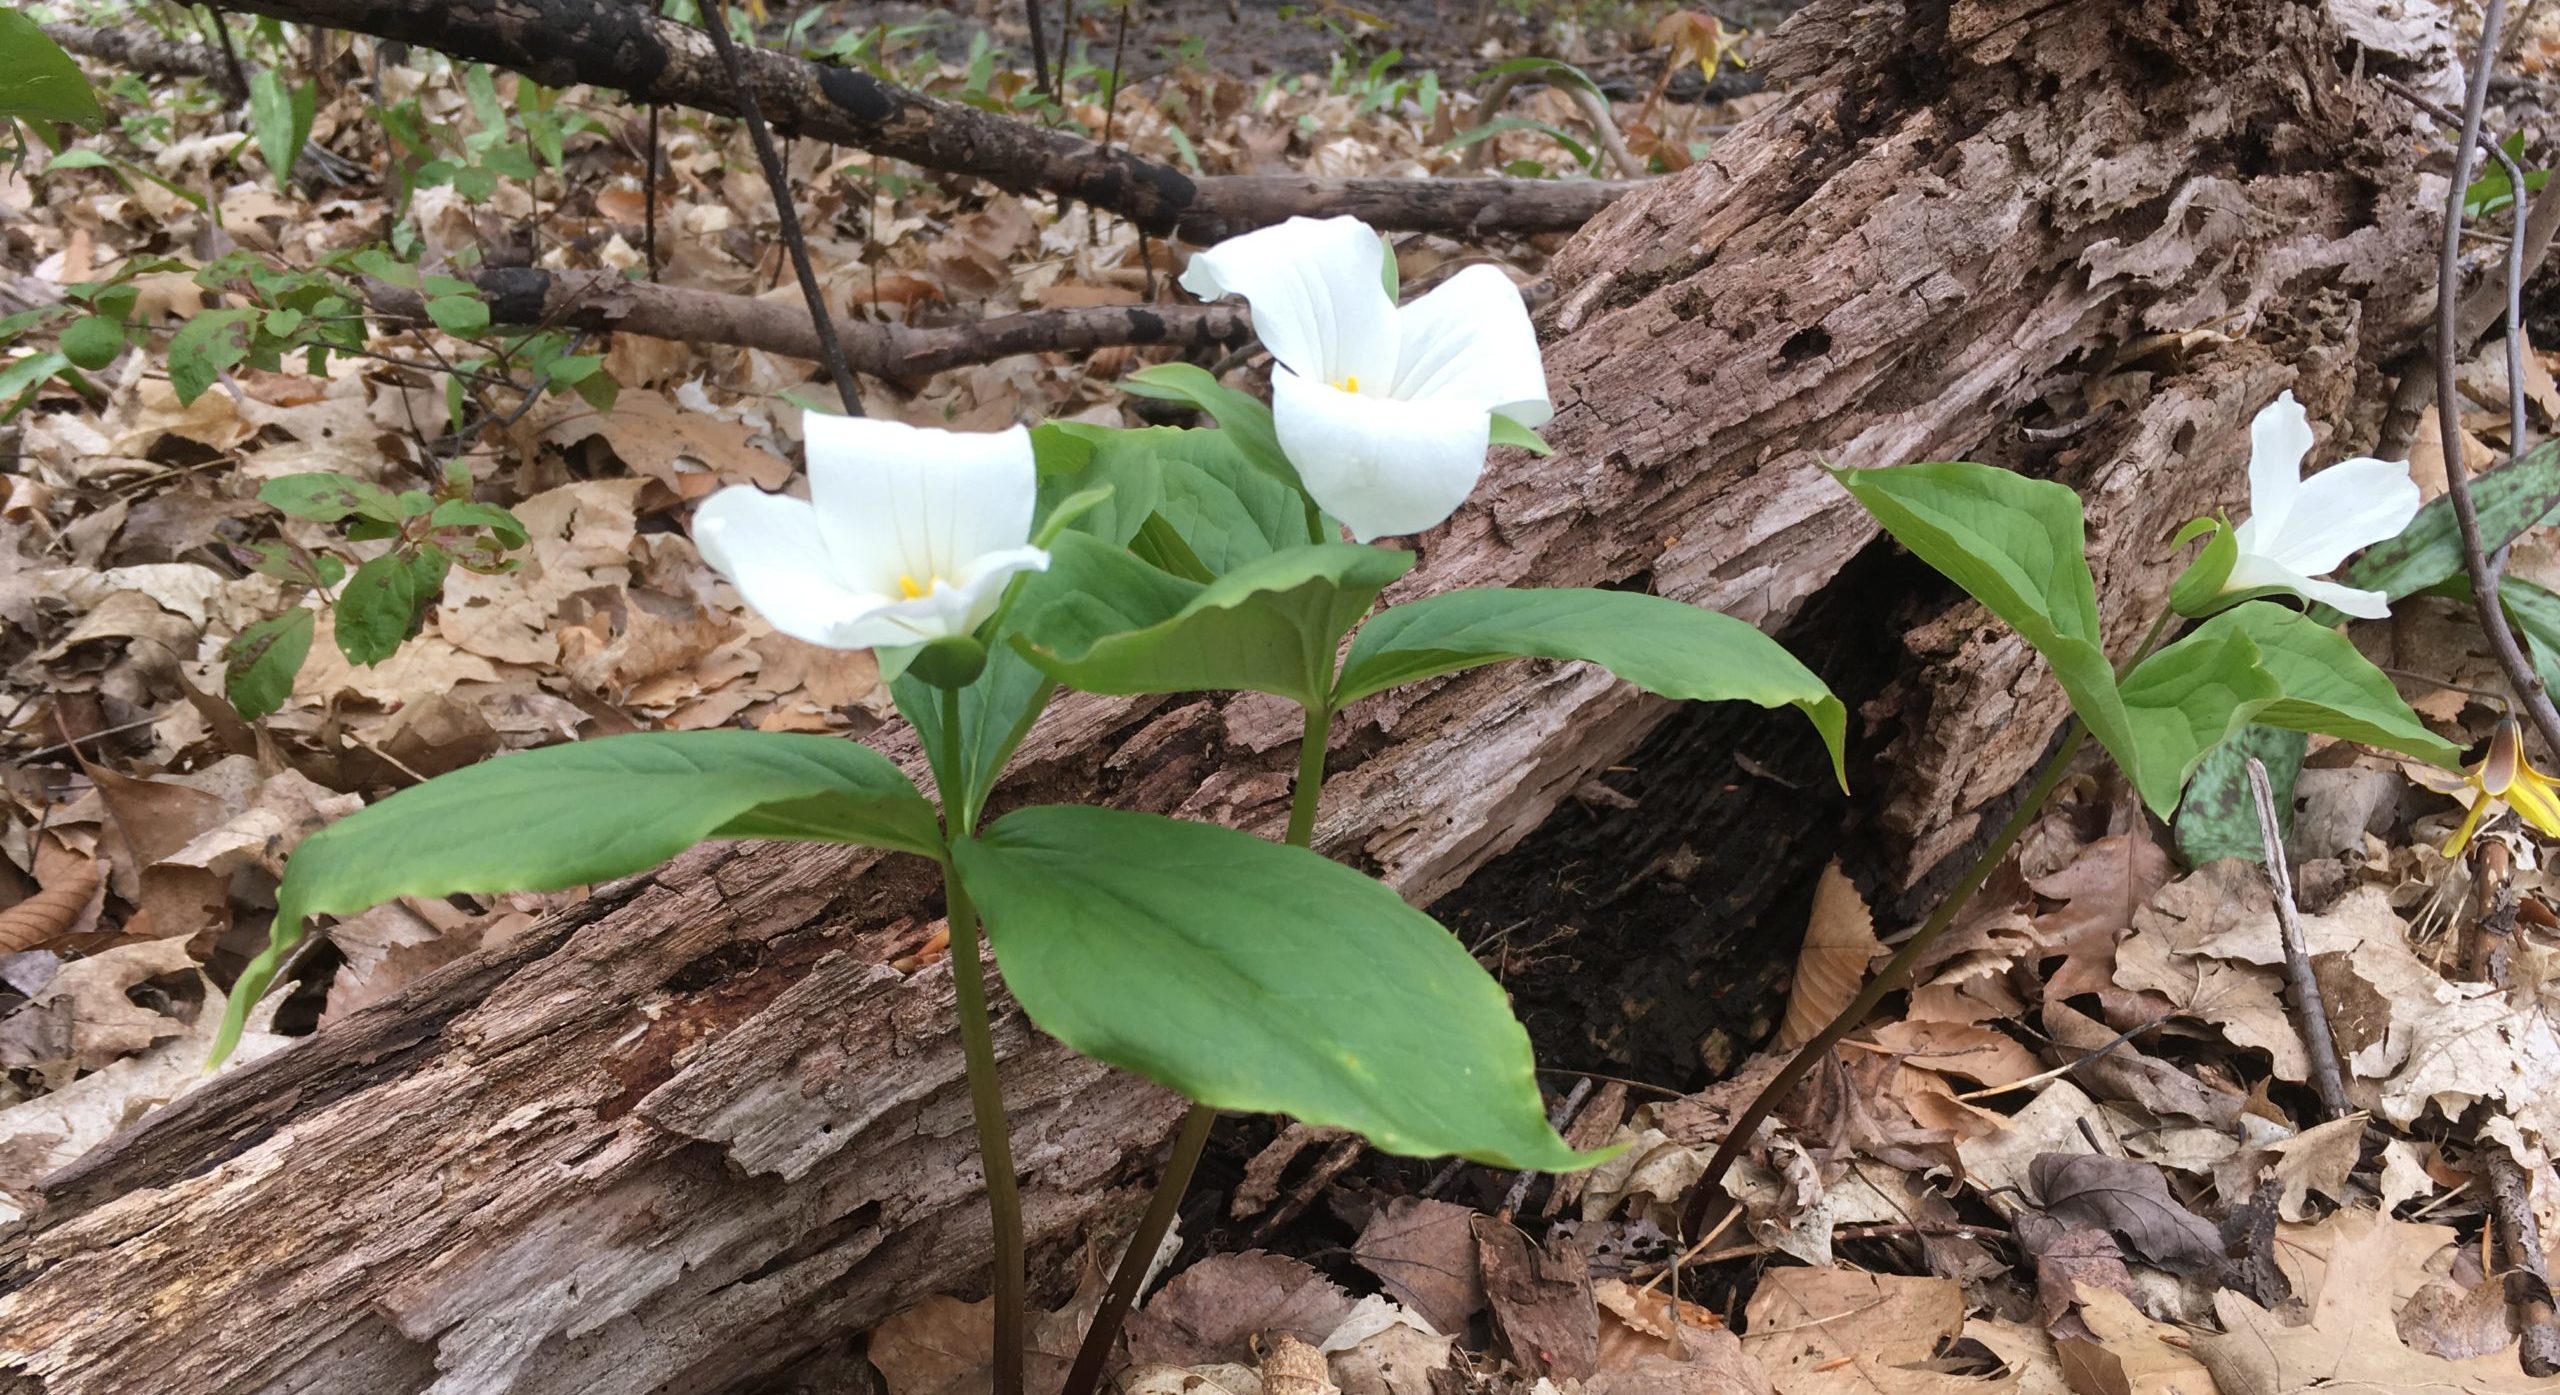 Trilliums growing by a decaying log